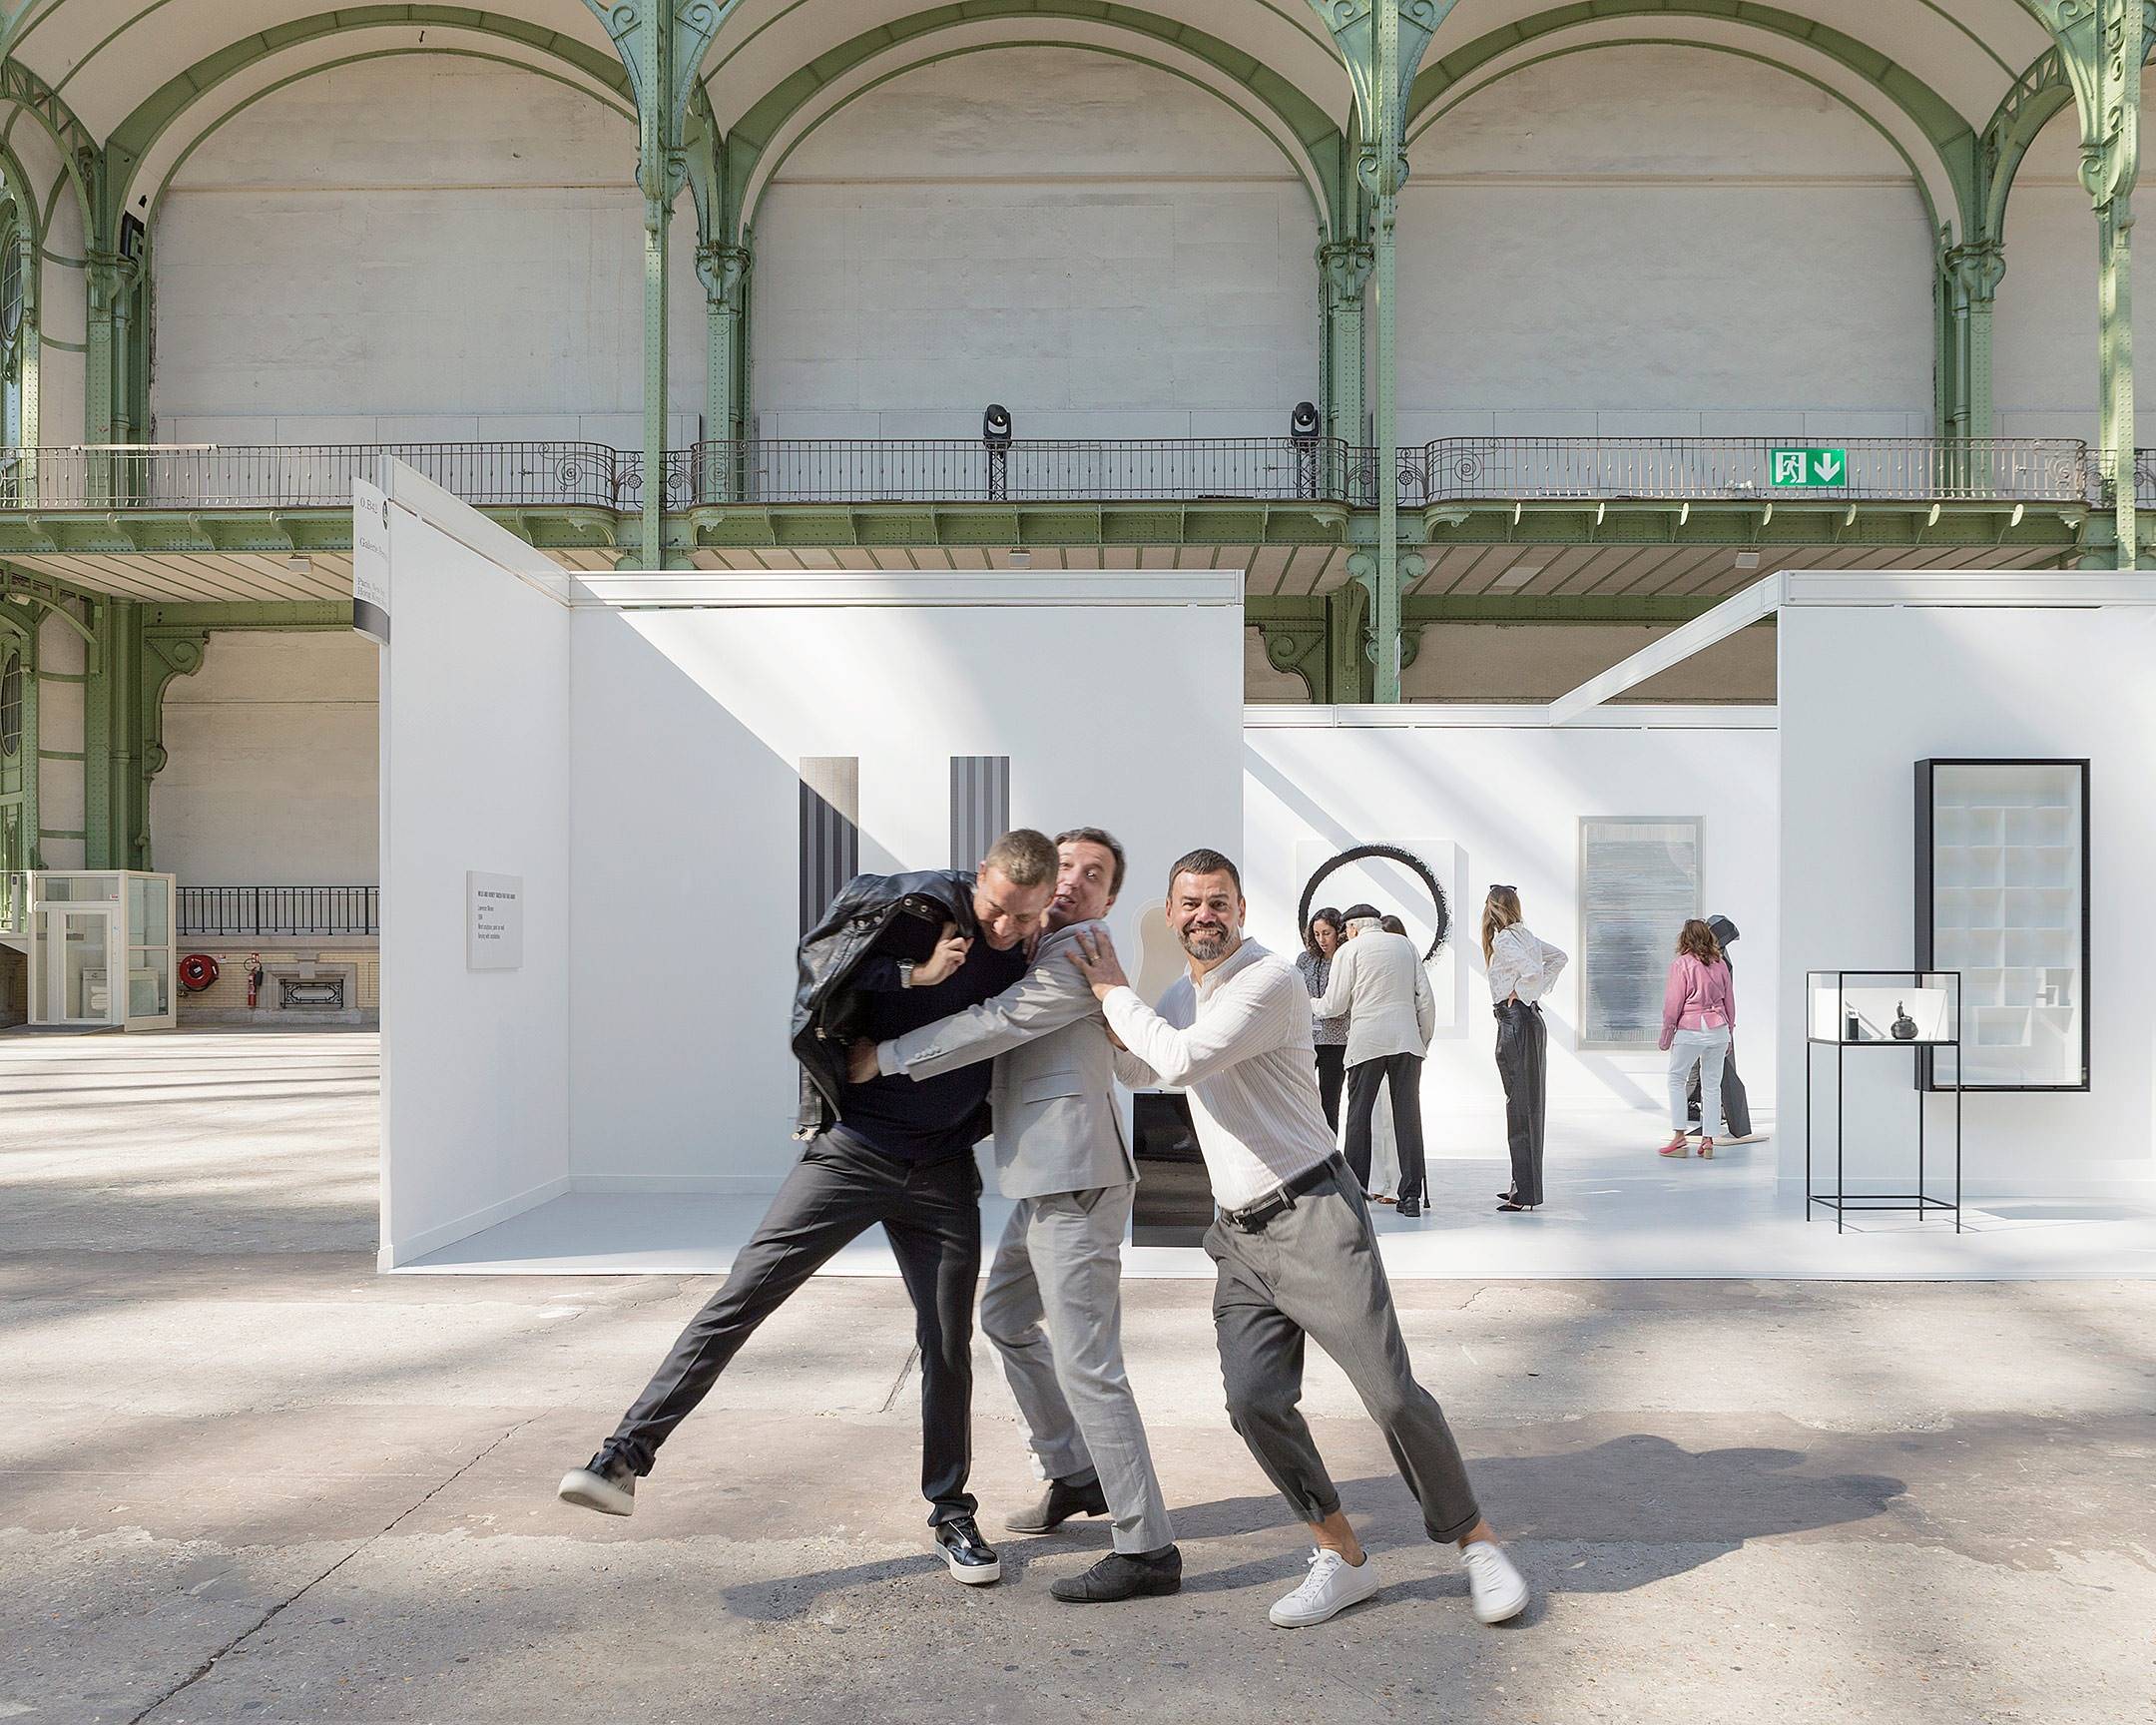 Portrait of Elmgreen & Dragset and Emmanuel Perrotin in front of the one-day exhibition Elmgreen & Dragset présentent la Galerie Perrotin au Grand Palais in Paris on Saturday, September 24th 2016.  Photo Claire Dorn, courtesy Galerie Perrotin